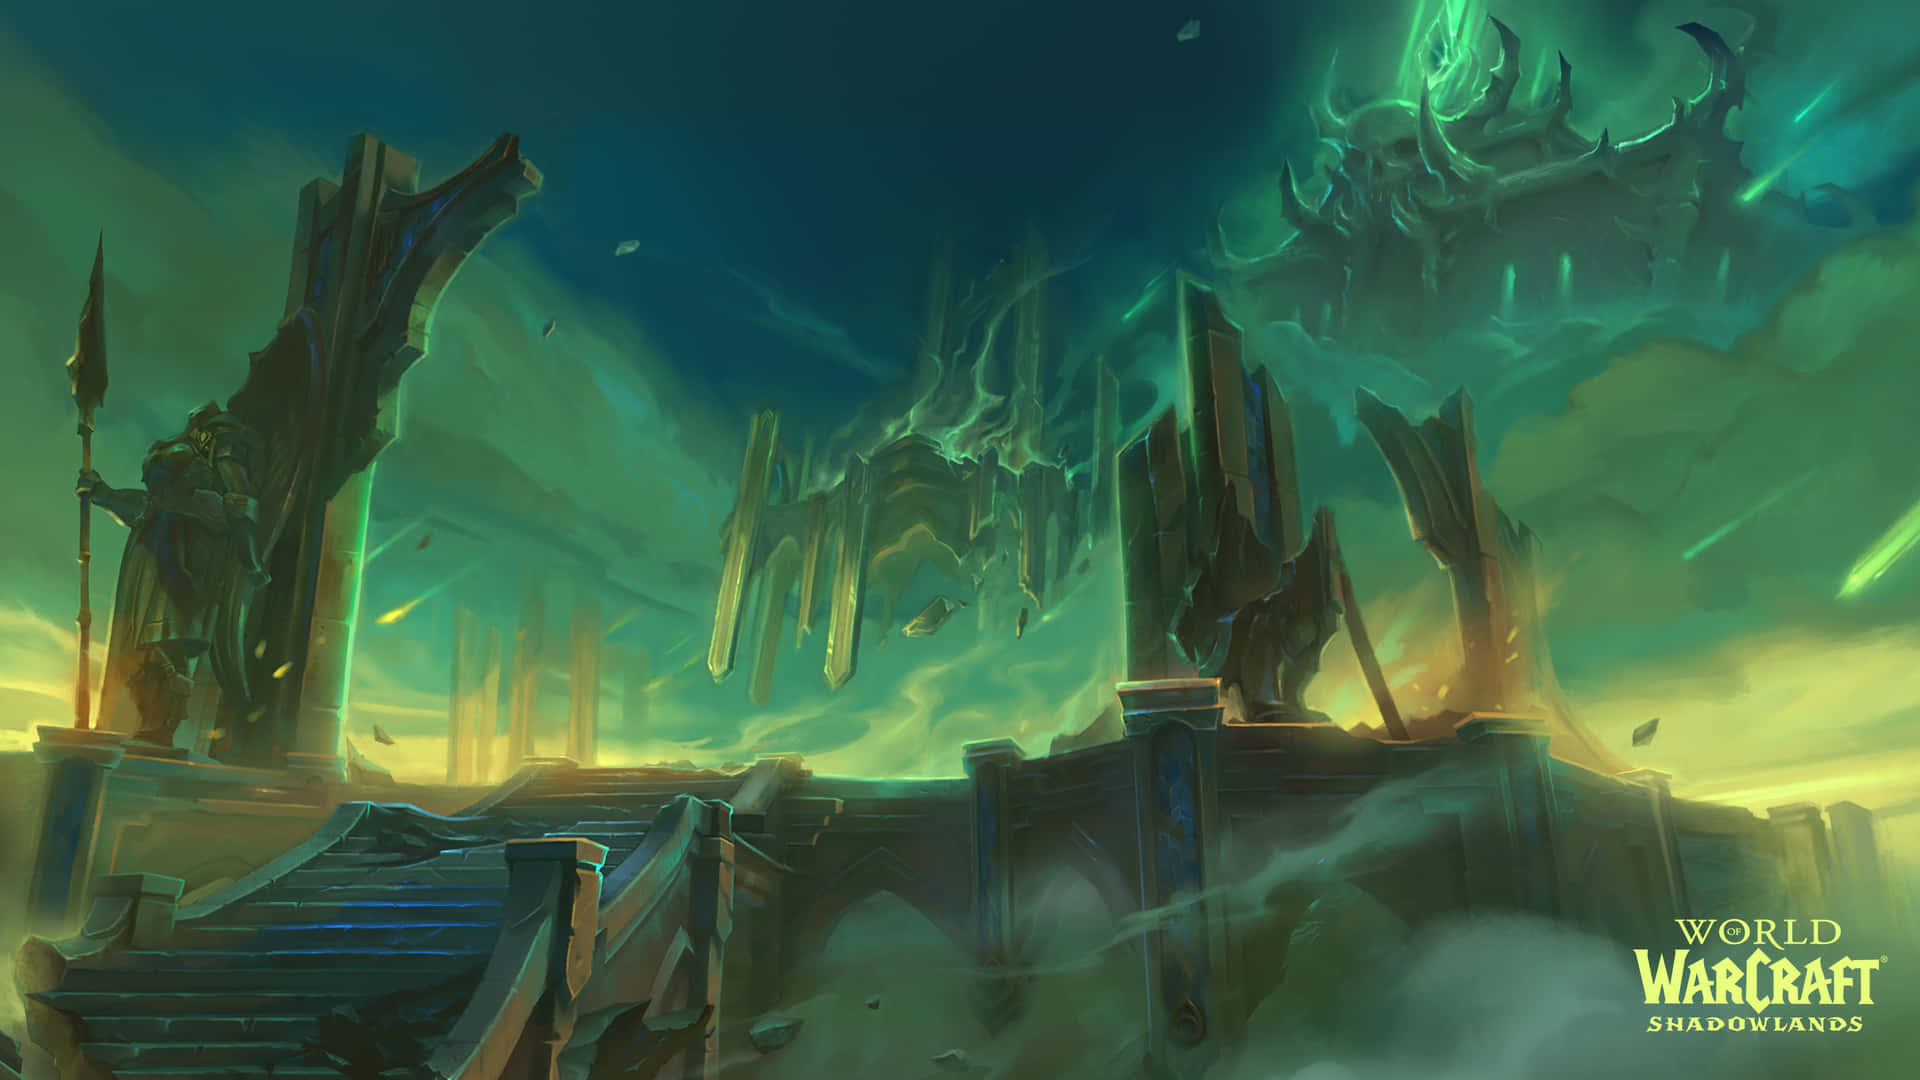 Explore the Shadowlands in the newest expansion of World of Warcraft Wallpaper